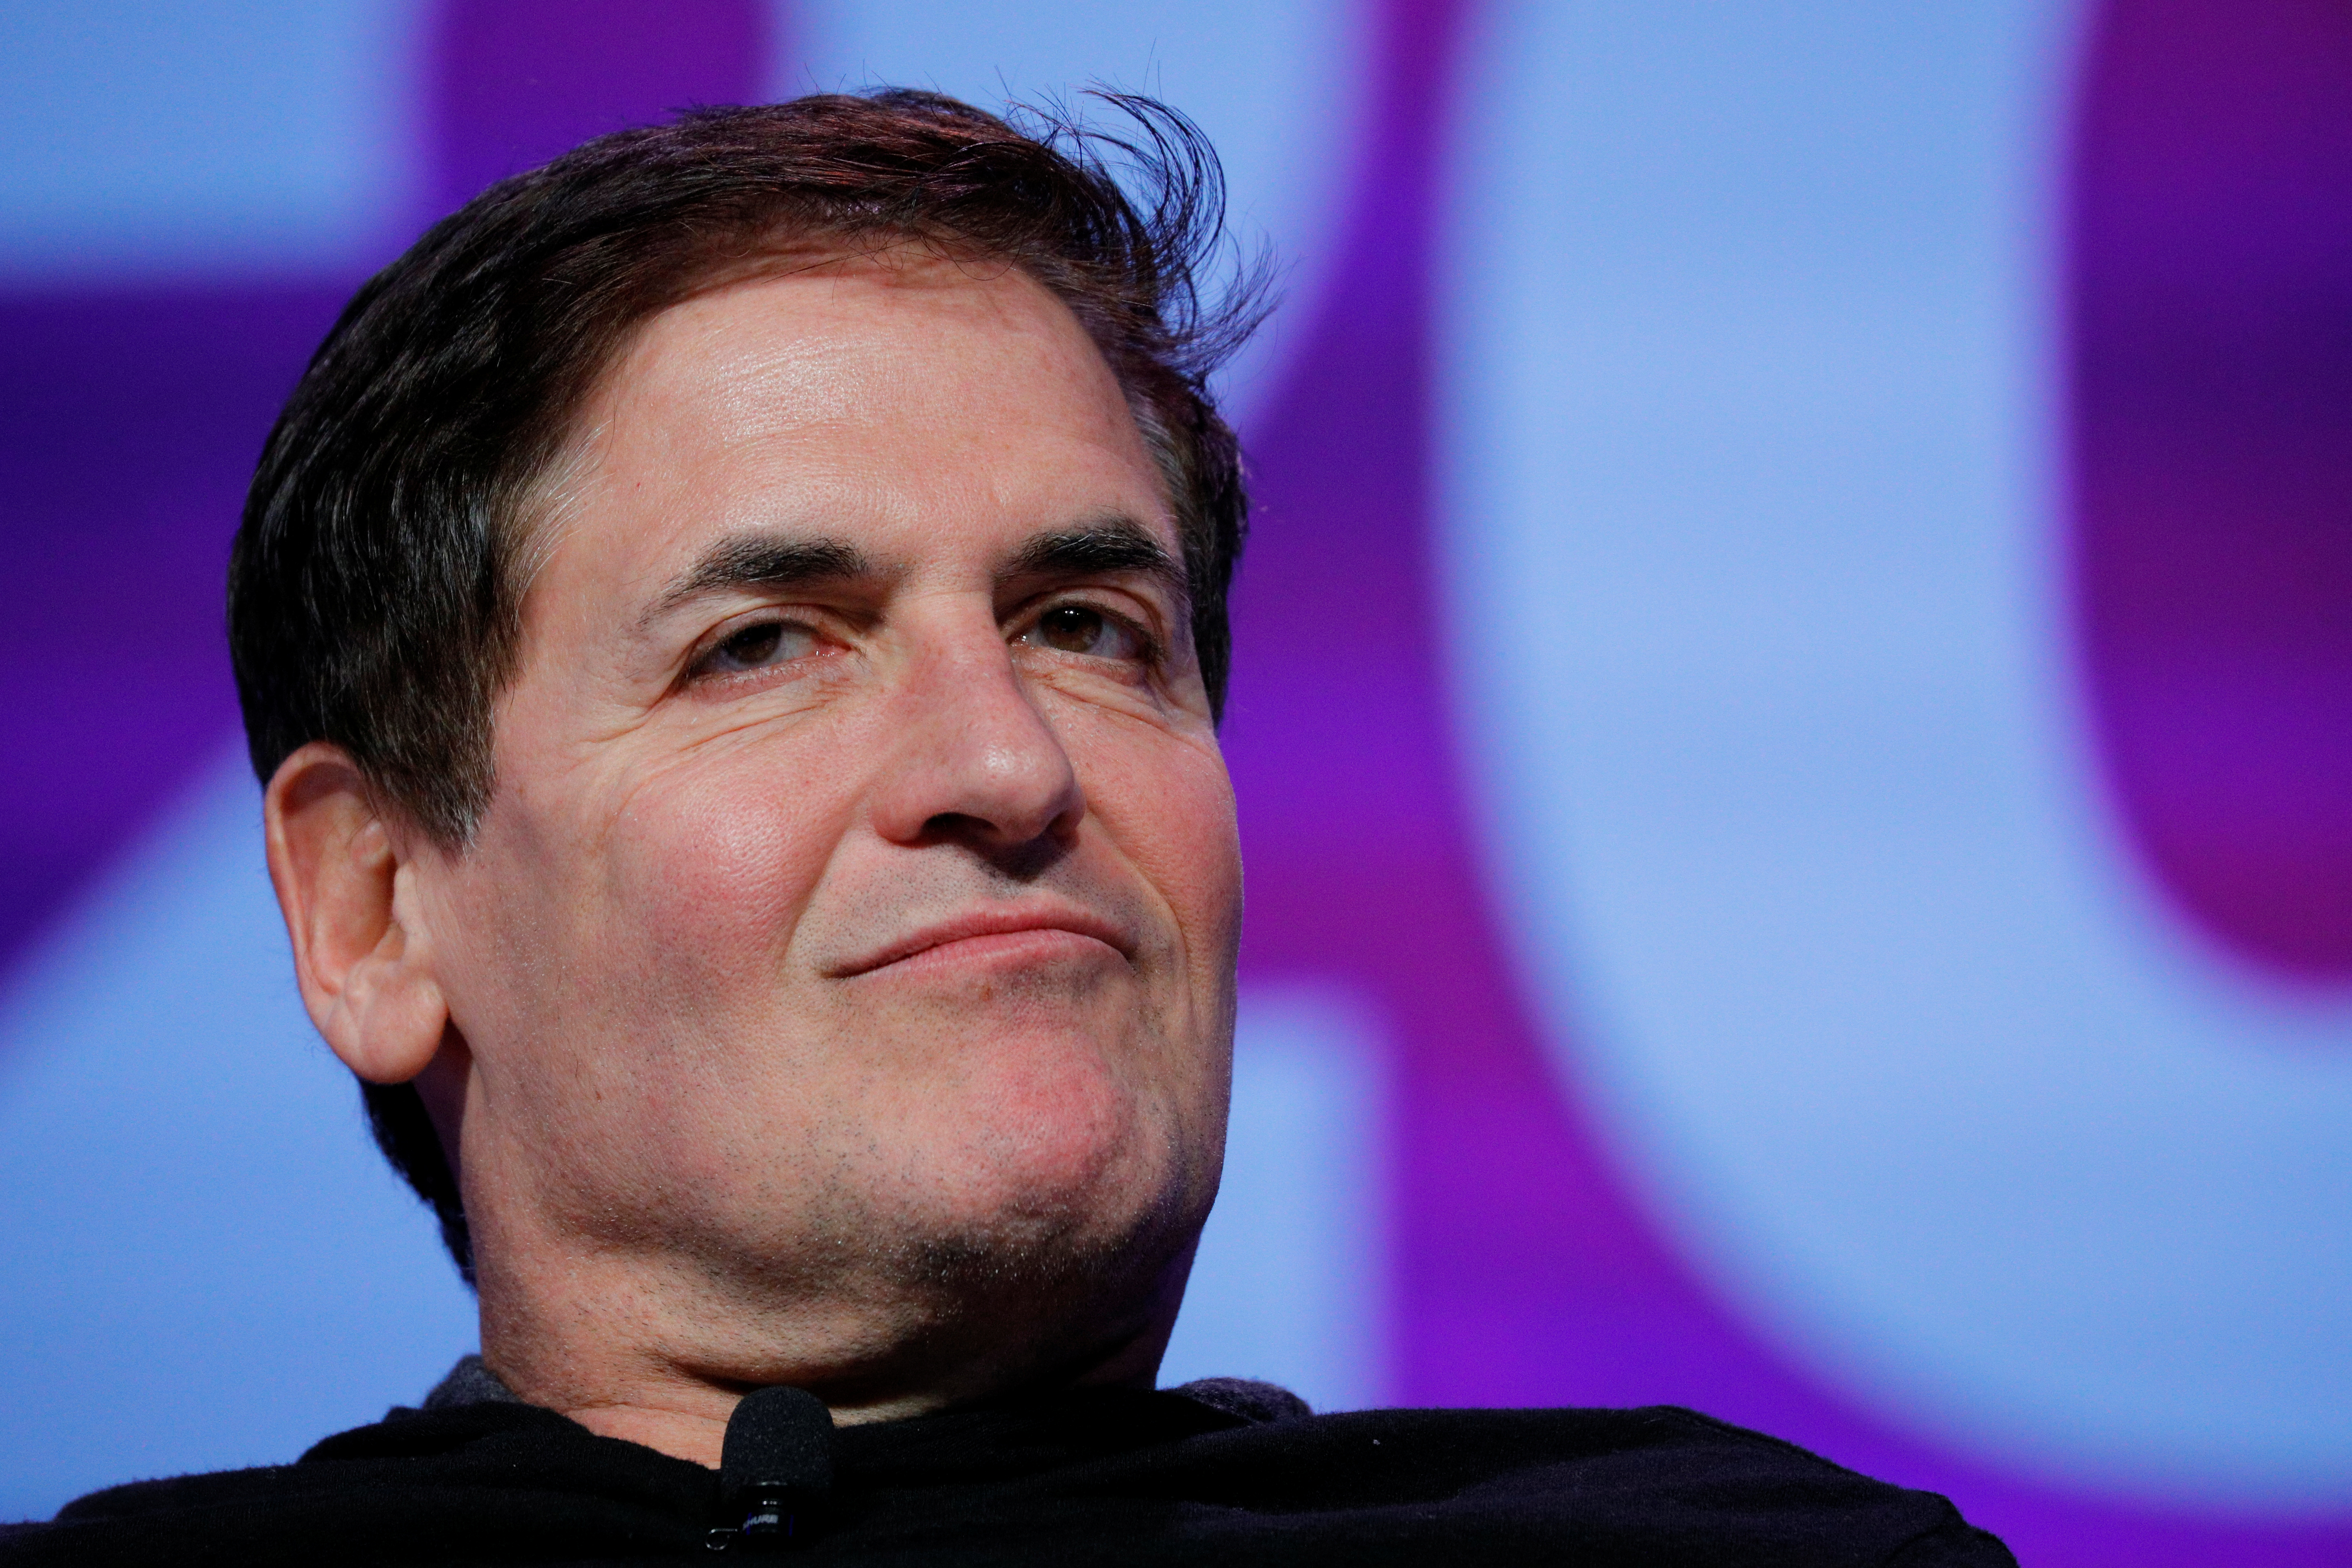 Businessman Mark Cuban listens as he is introduced at the South by Southwest (SXSW) Music Film Interactive Festival 2017 in Austin